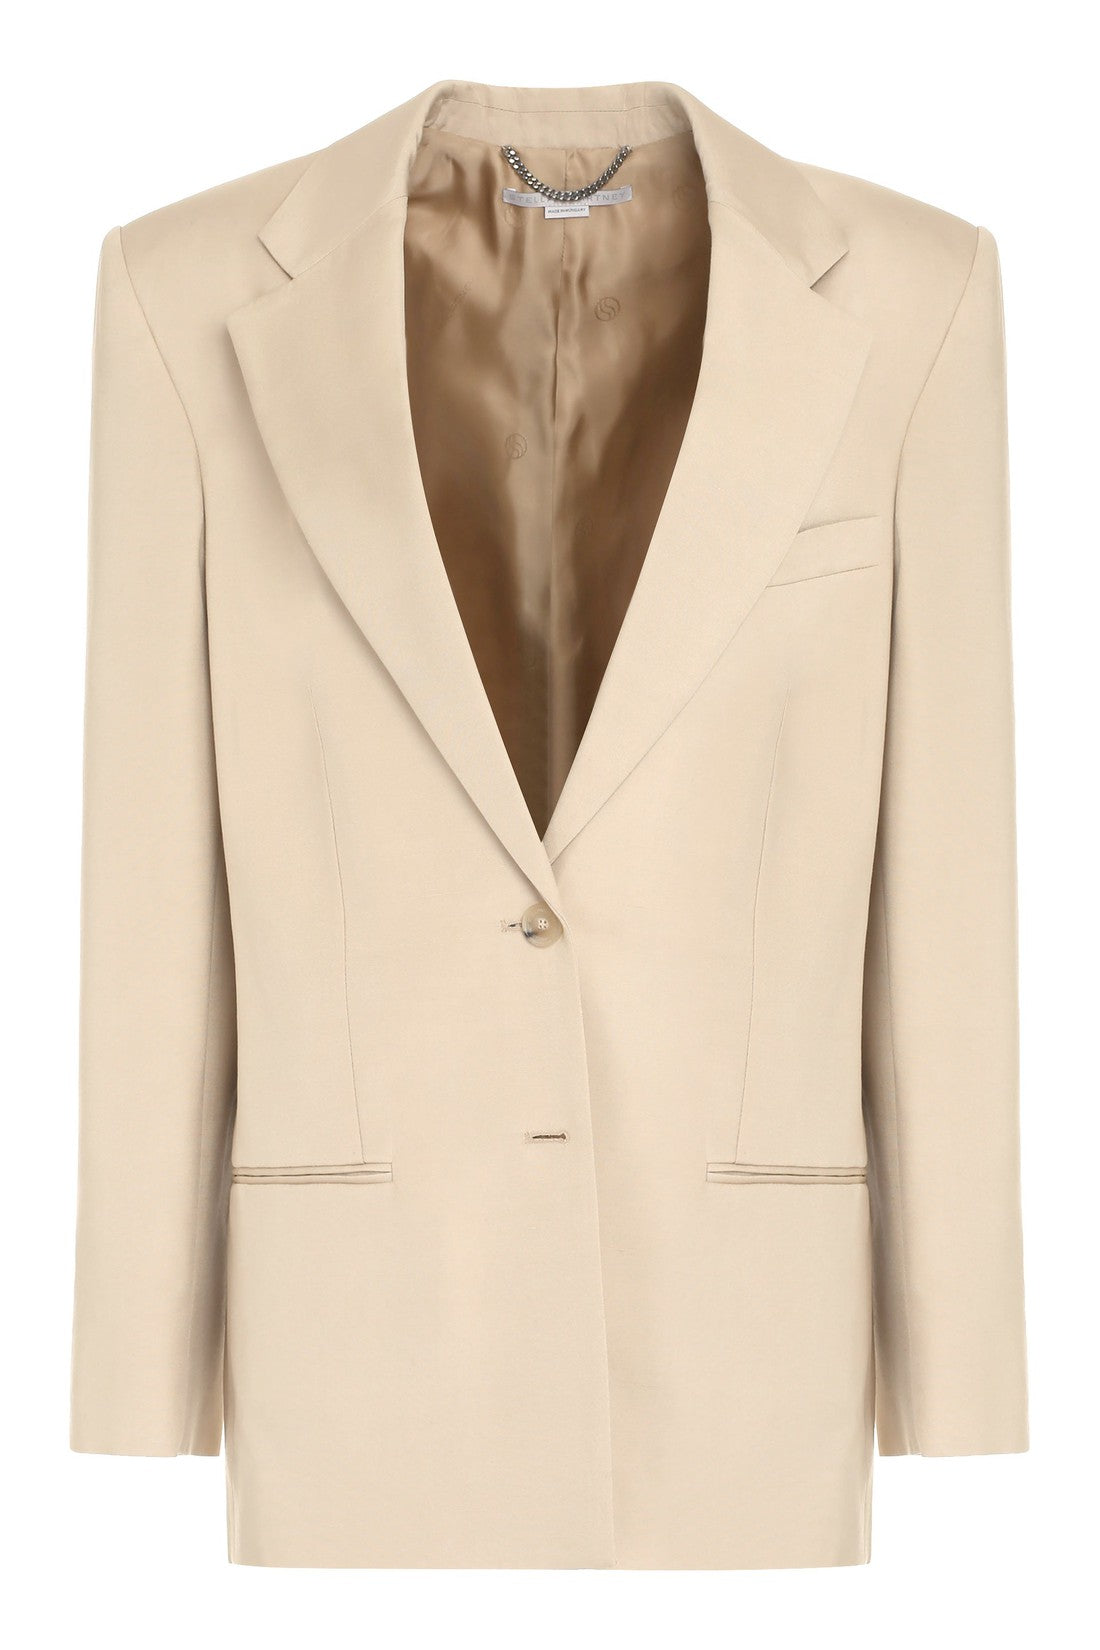 Stella McCartney-OUTLET-SALE-Single-breasted two-button jacket-ARCHIVIST